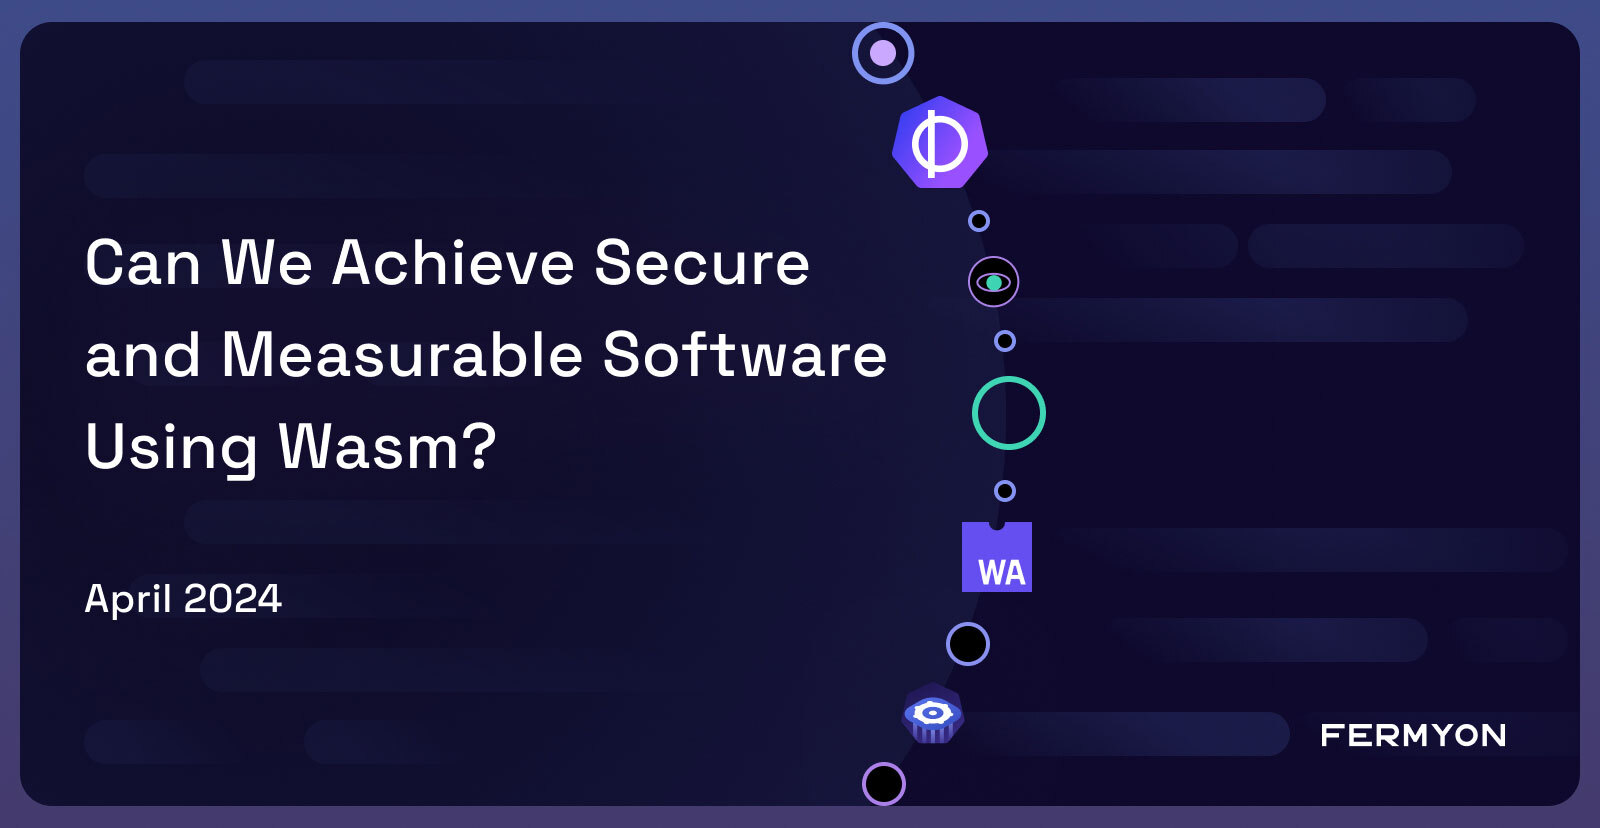 Can We Achieve Secure and Measurable Software Using Wasm?